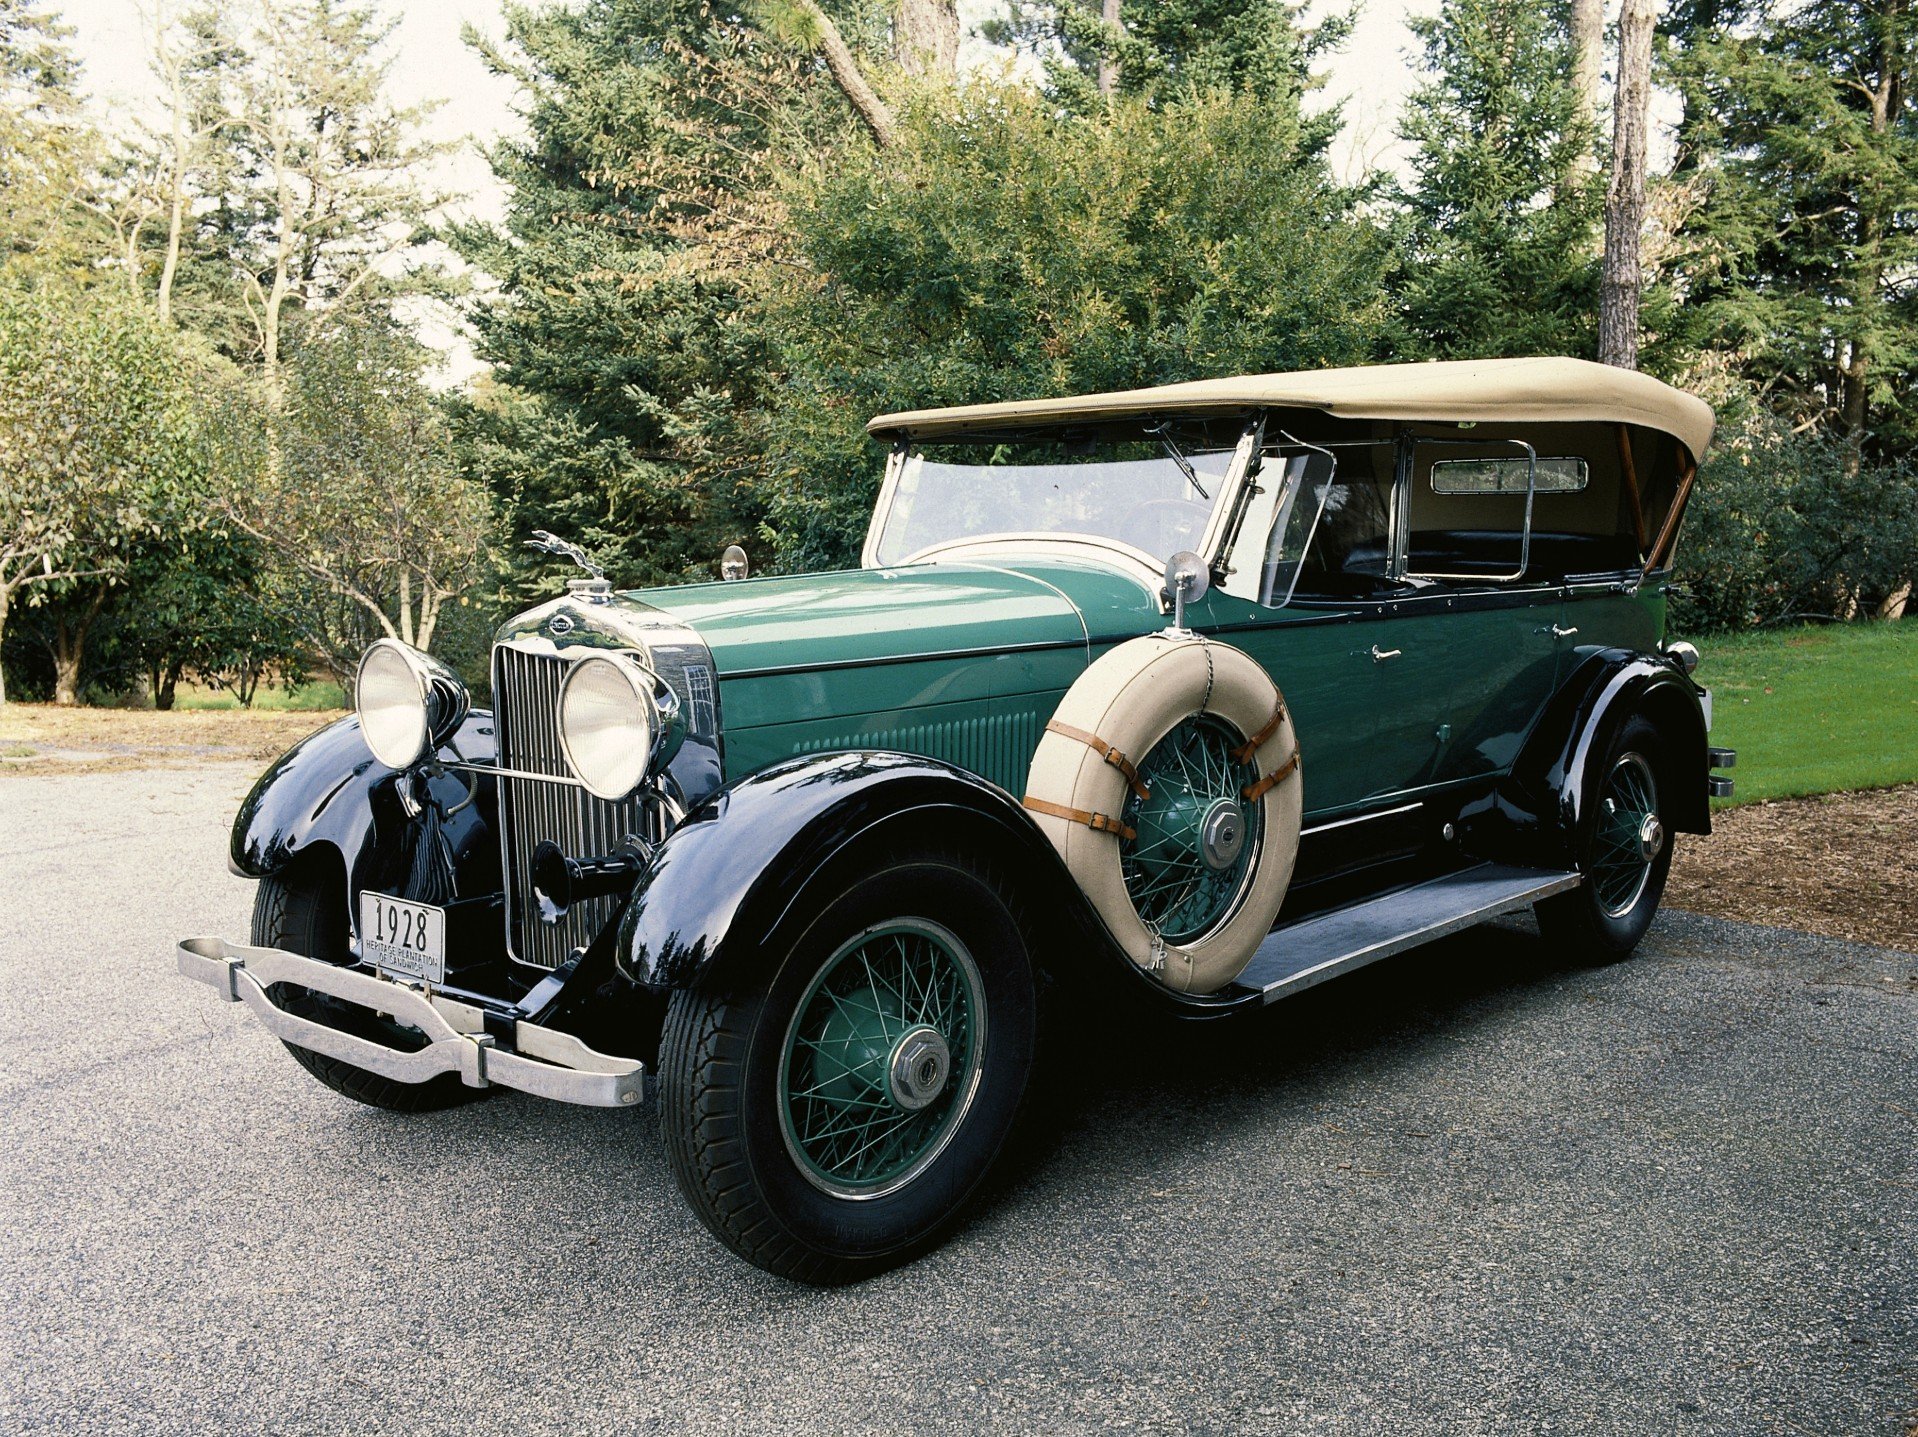 1927 Lincoln Sport Touring - Heritage Museums & Gardens